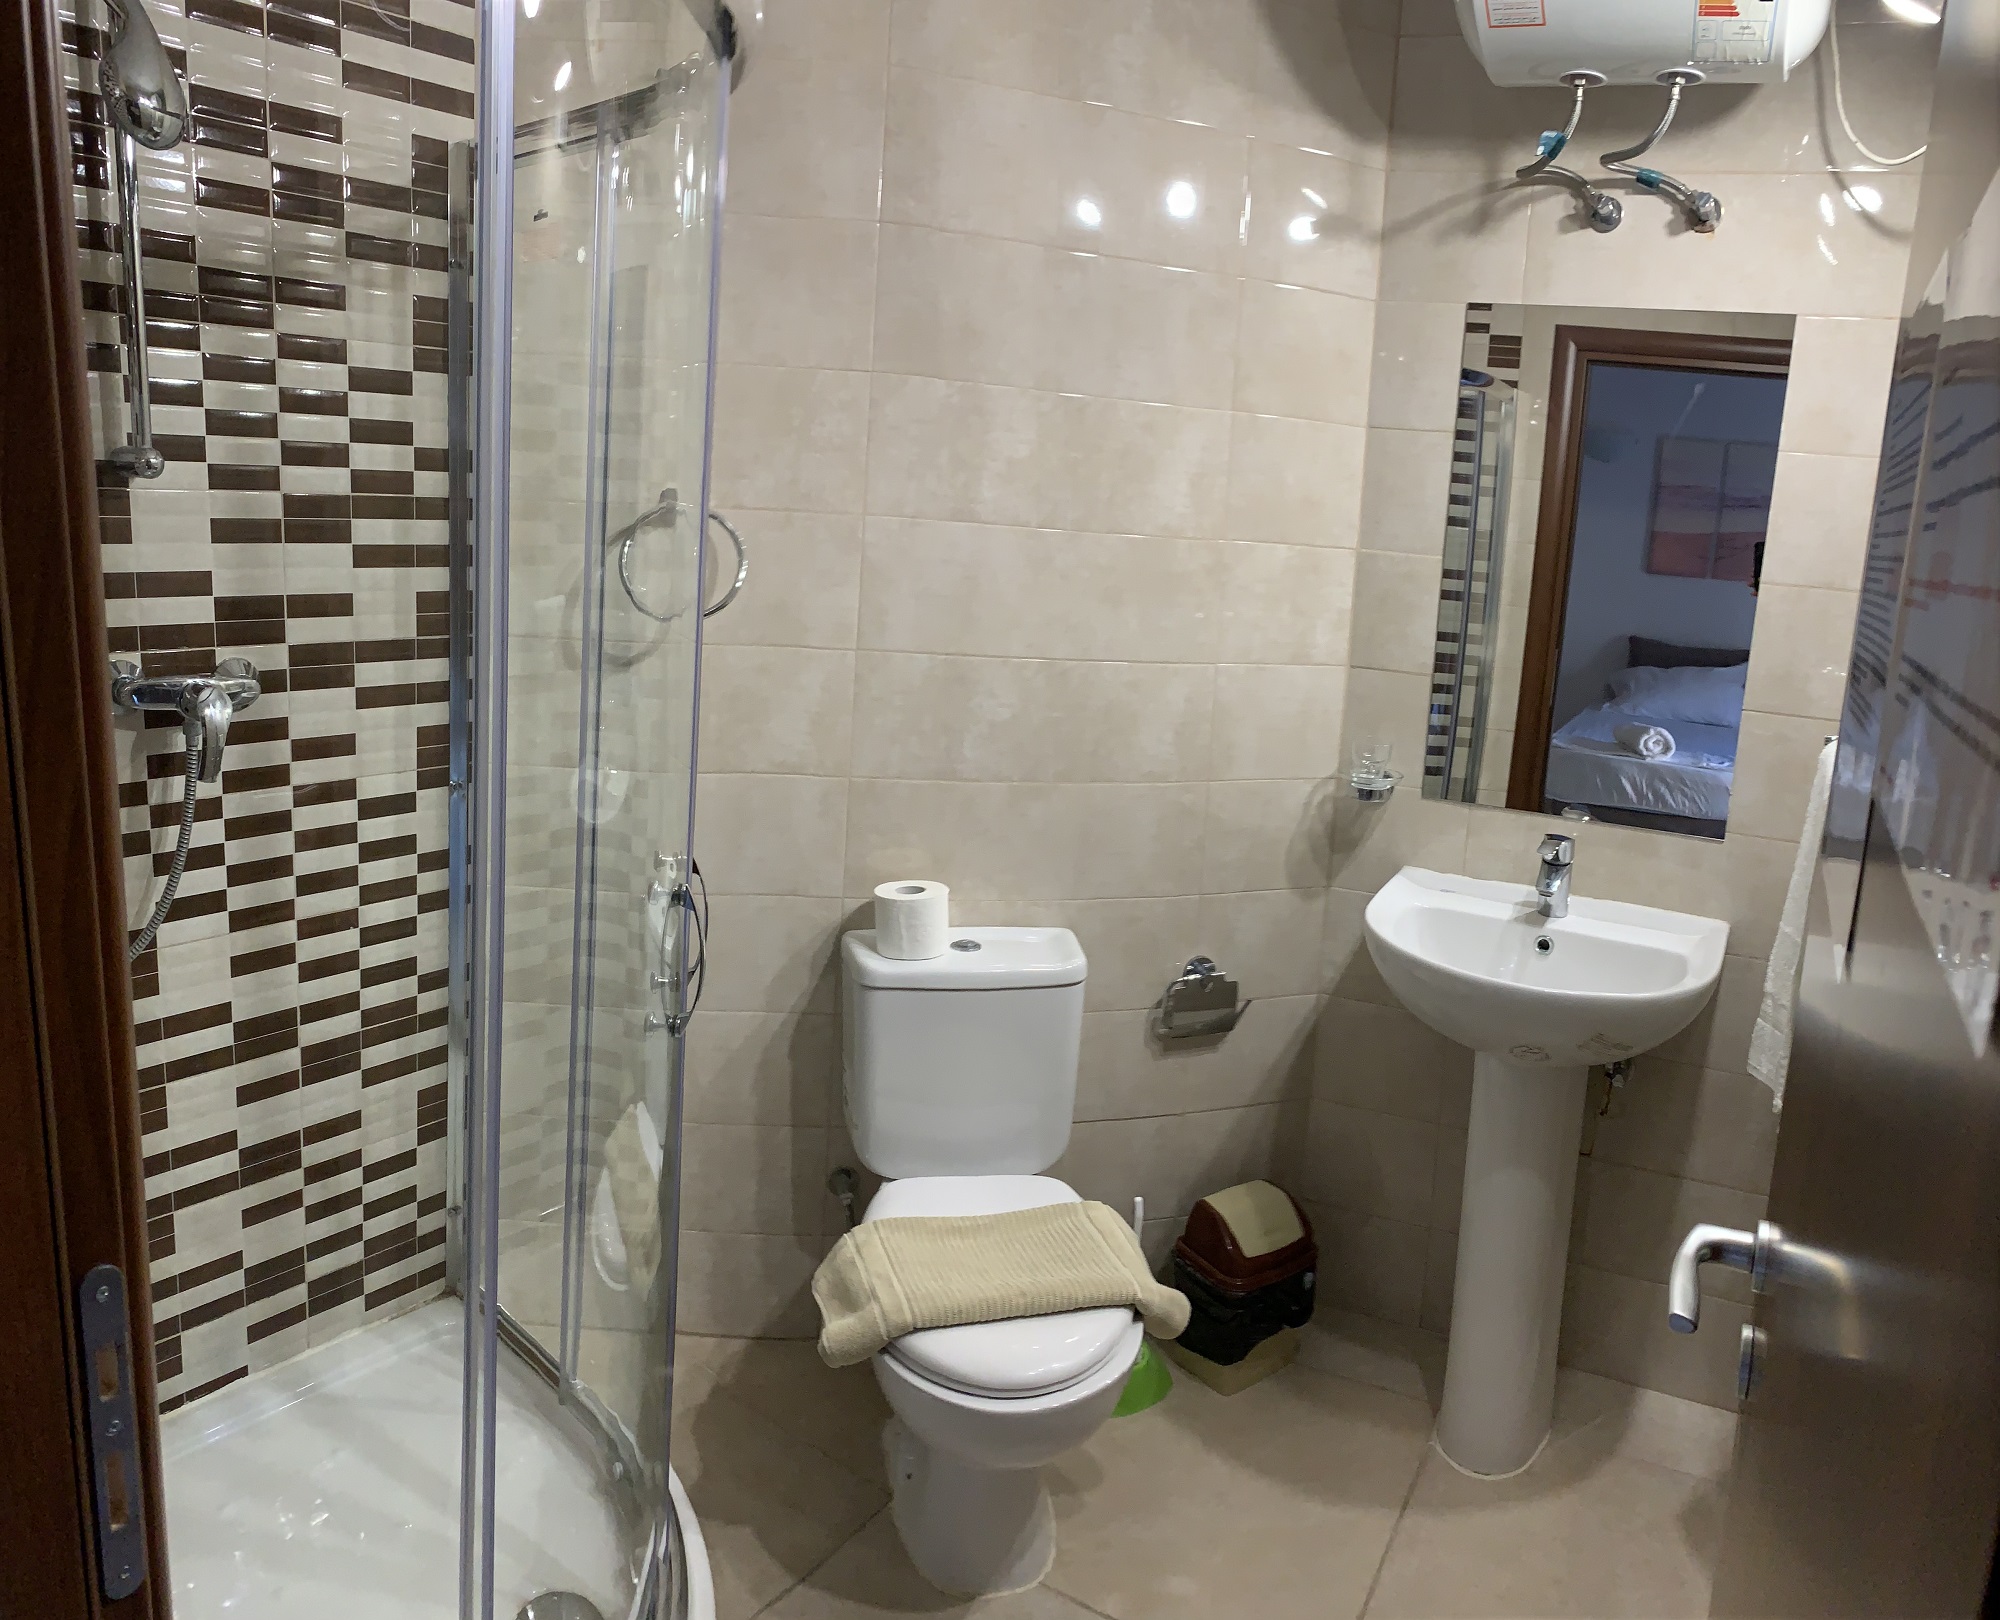 Shared bathroom at our BELS Gozo student residences